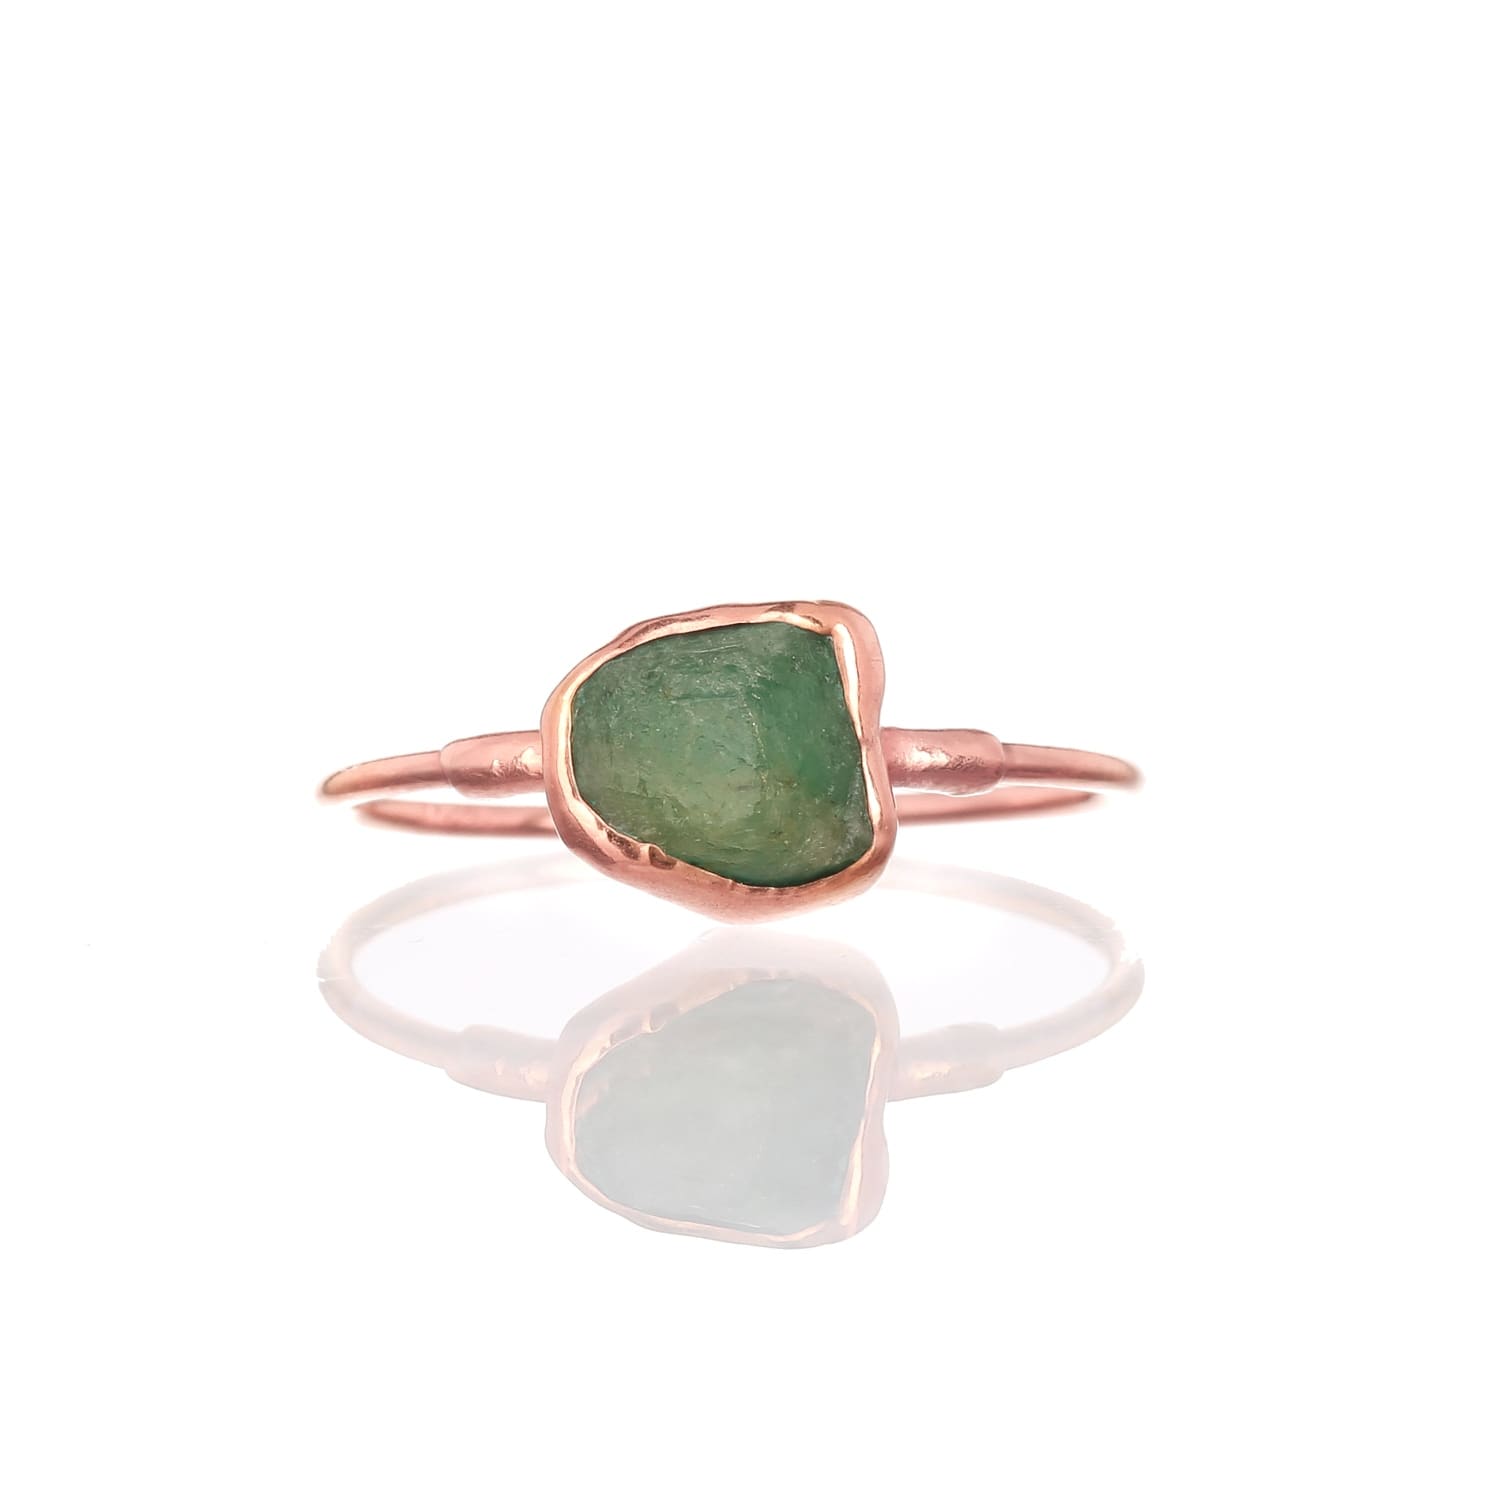 Raw Emerald Ring in Rose Gold Gemstone Jewelry Rough Crystal